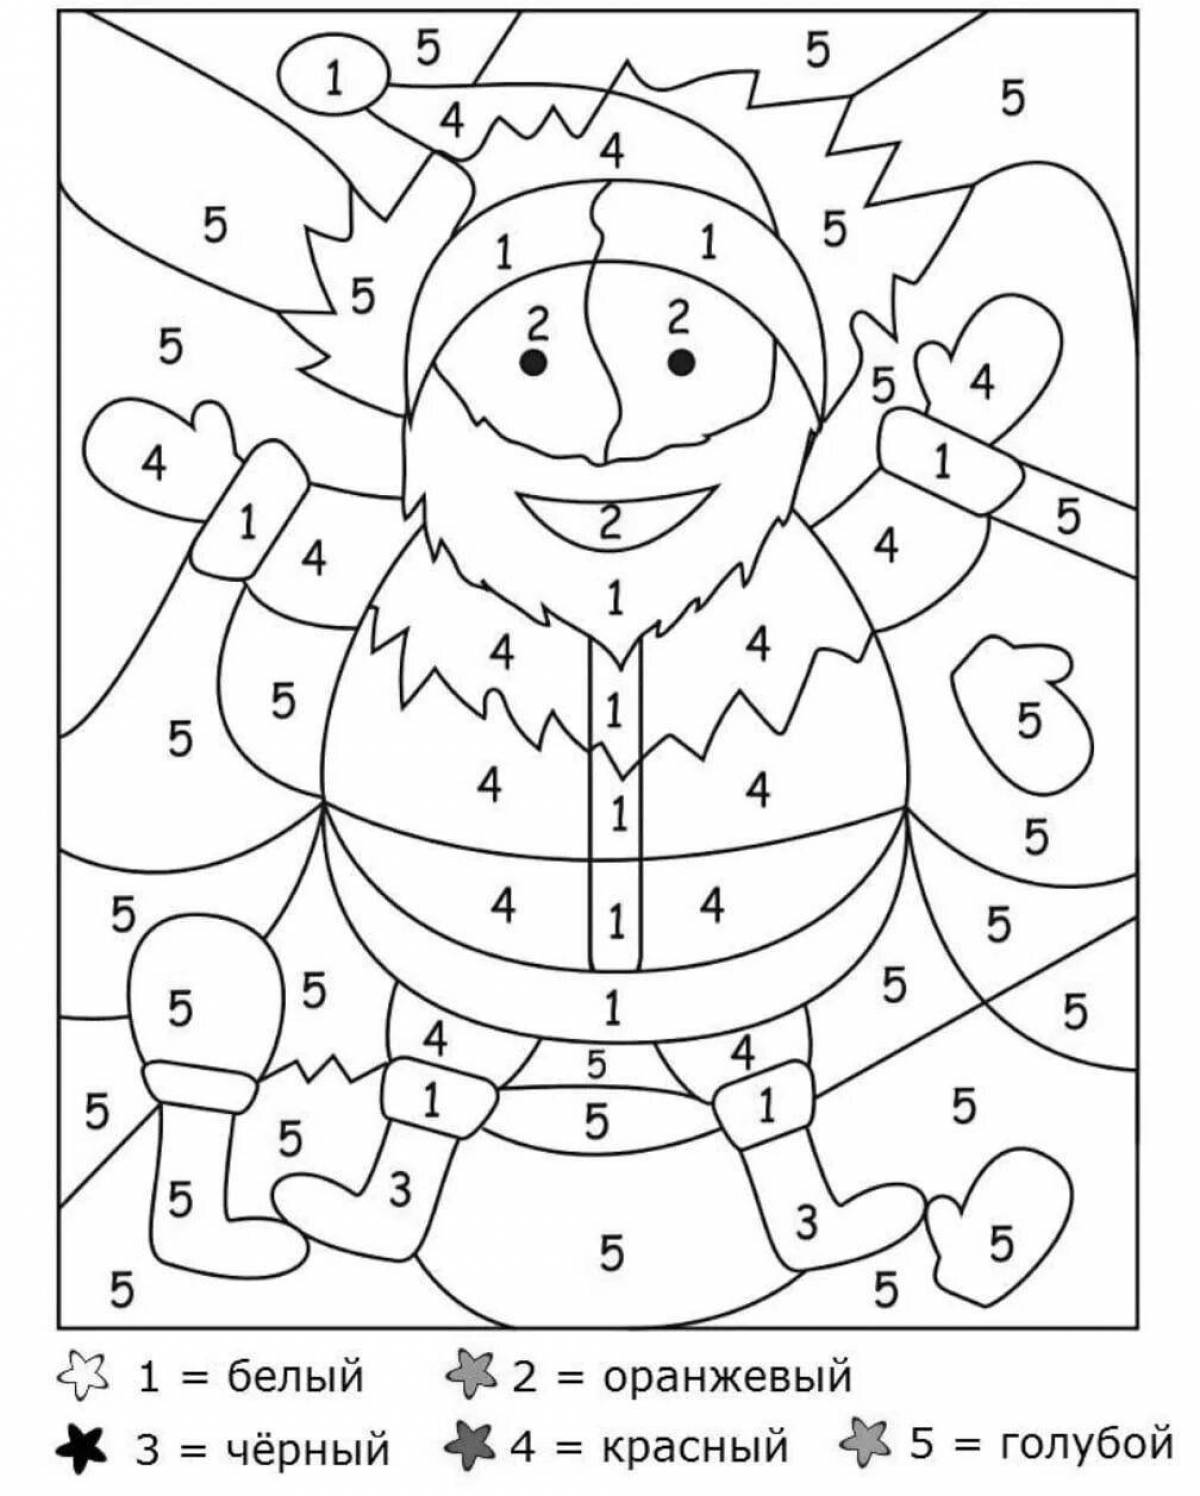 Playful coloring by numbers snowman